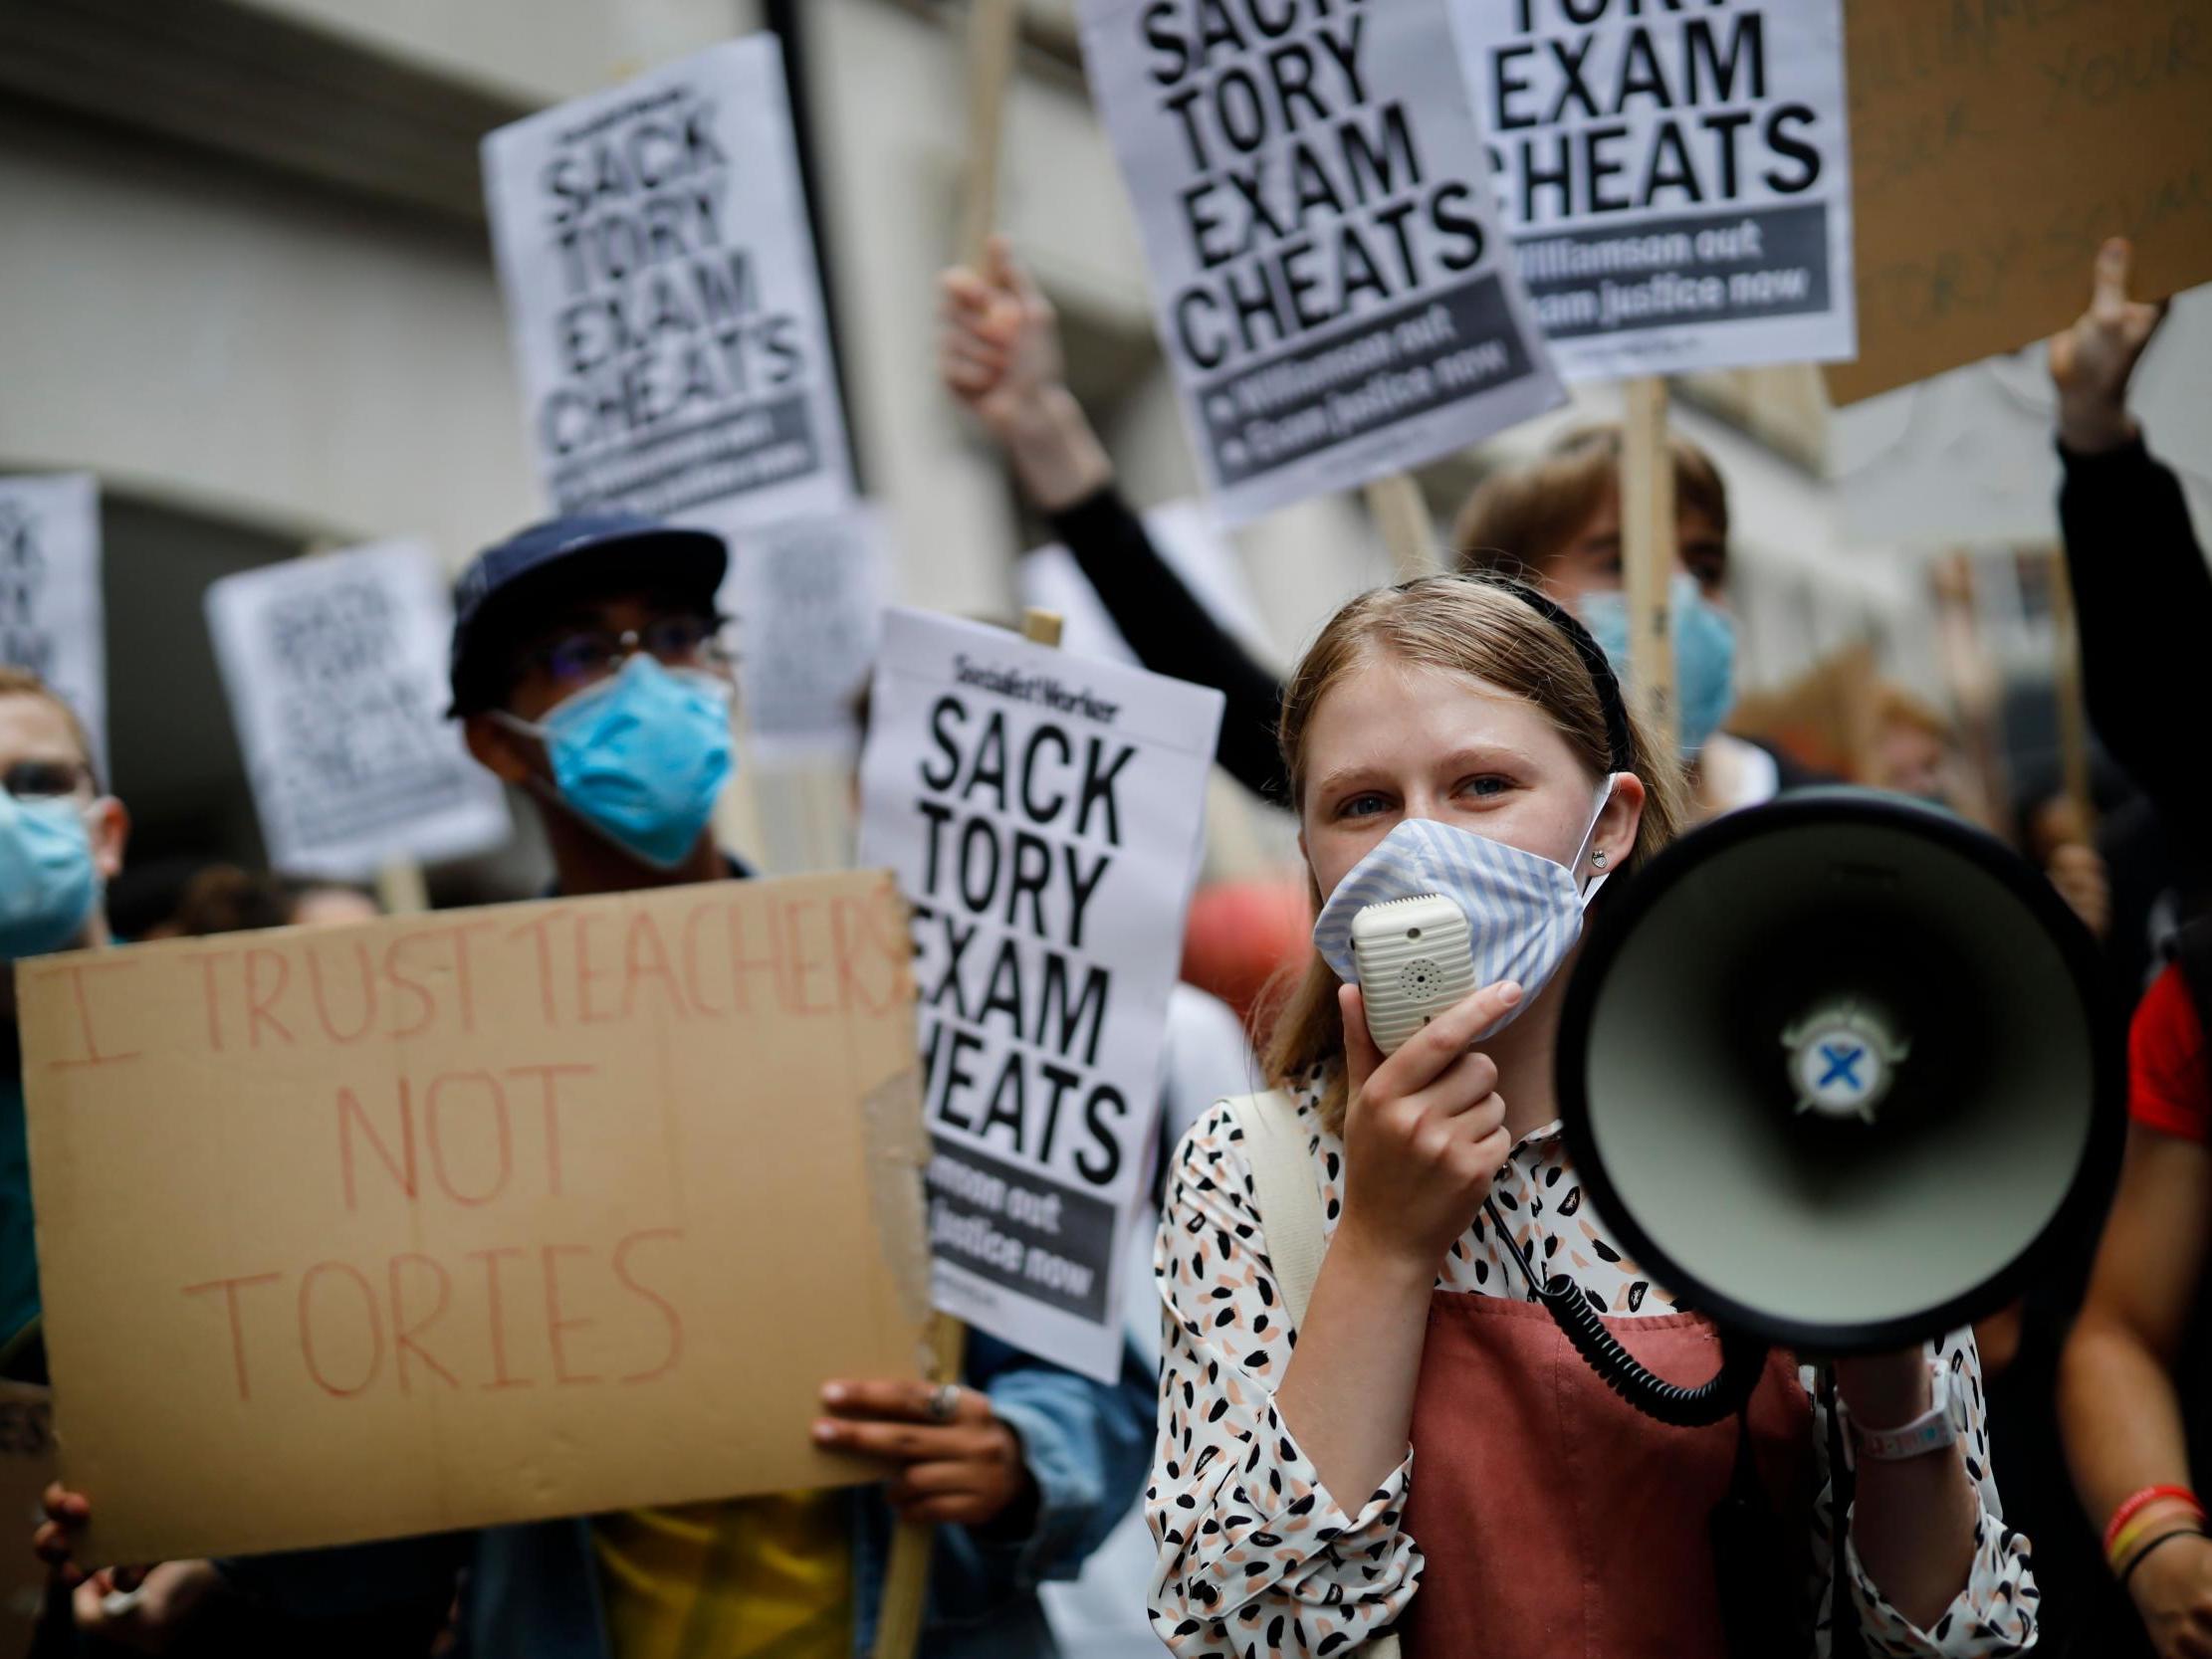 Students protest outside the Department for Education in London on Friday